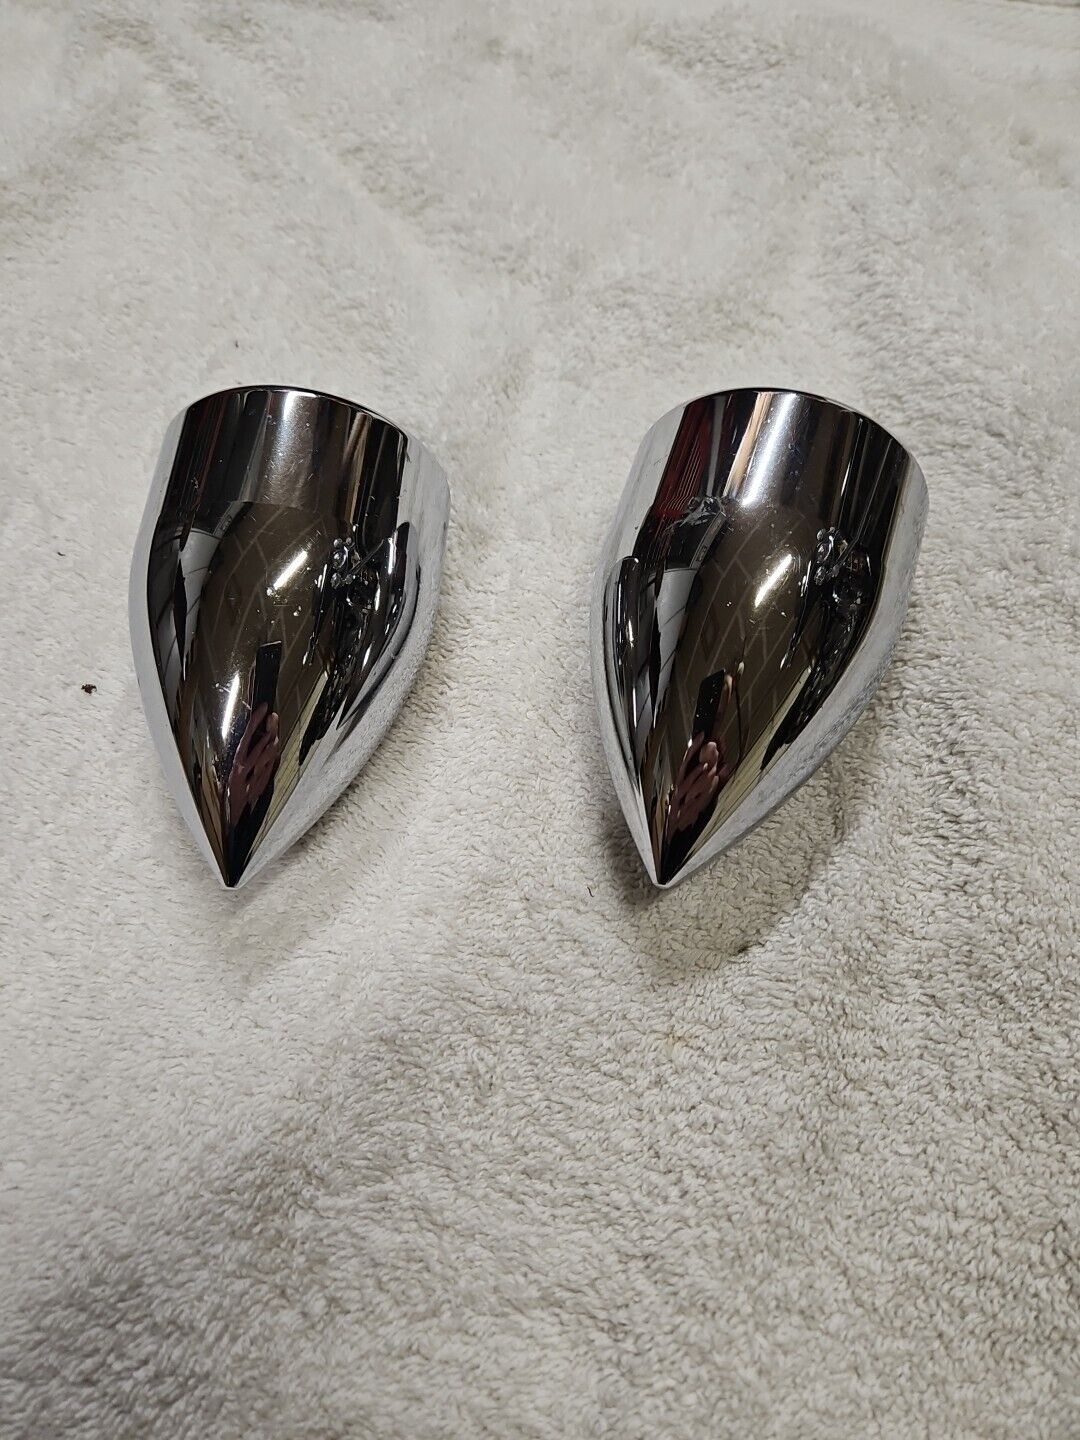 Aeromach  fork bullets front axle cap nut covers chrome Yamaha Road Star xv1600 